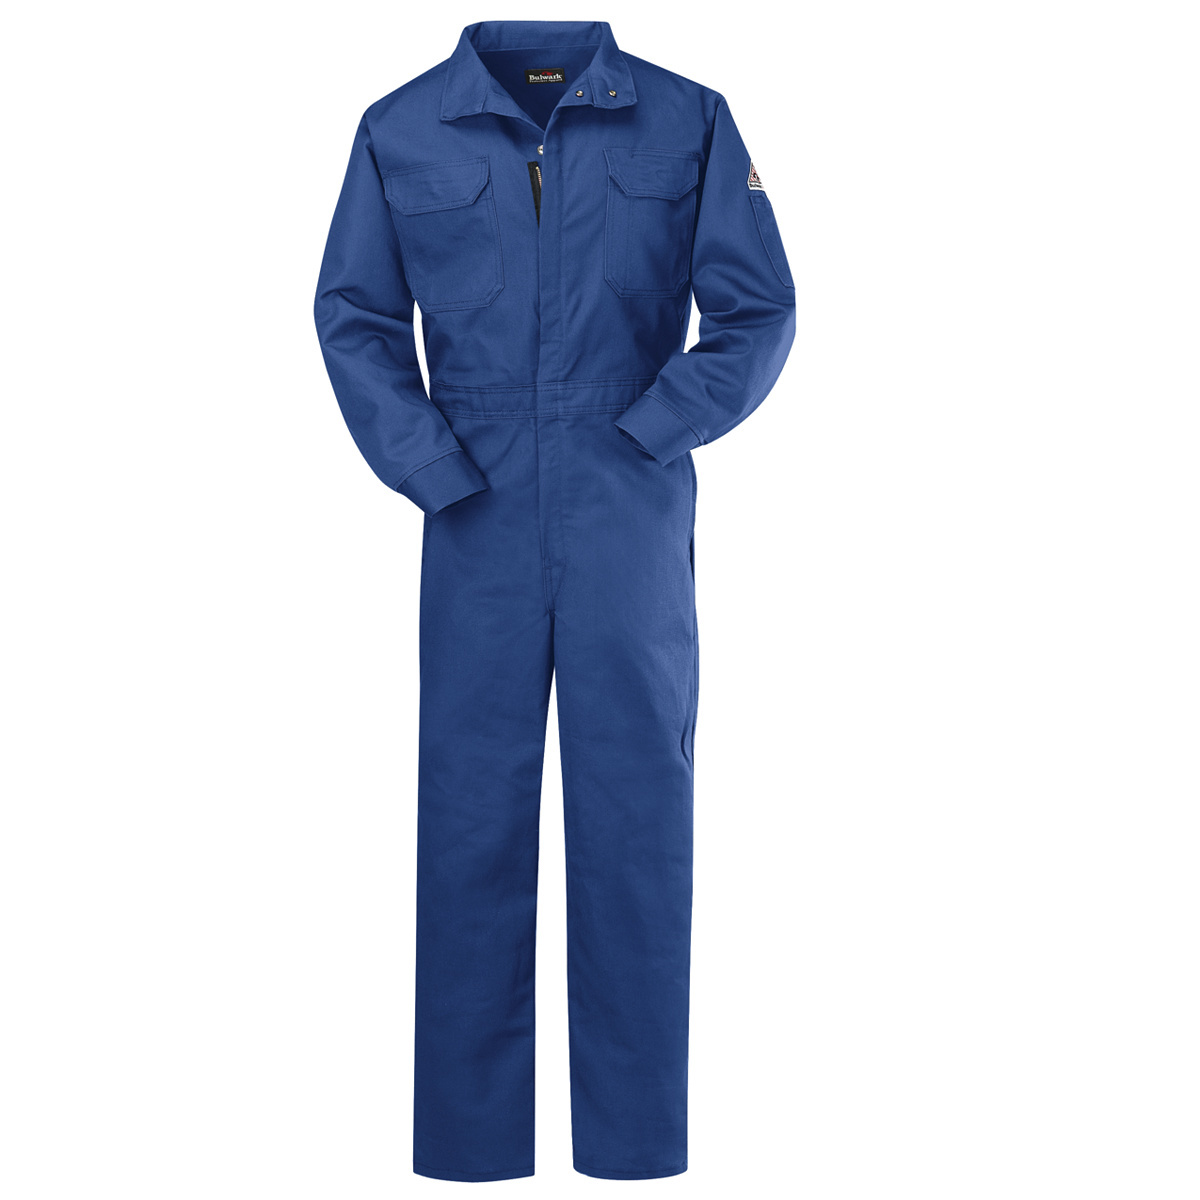 Bulwark® 46 Tall Royal Blue Westex Ultrasoft®/Cotton/Nylon Flame Resistant Coveralls With Zipper Front Closure